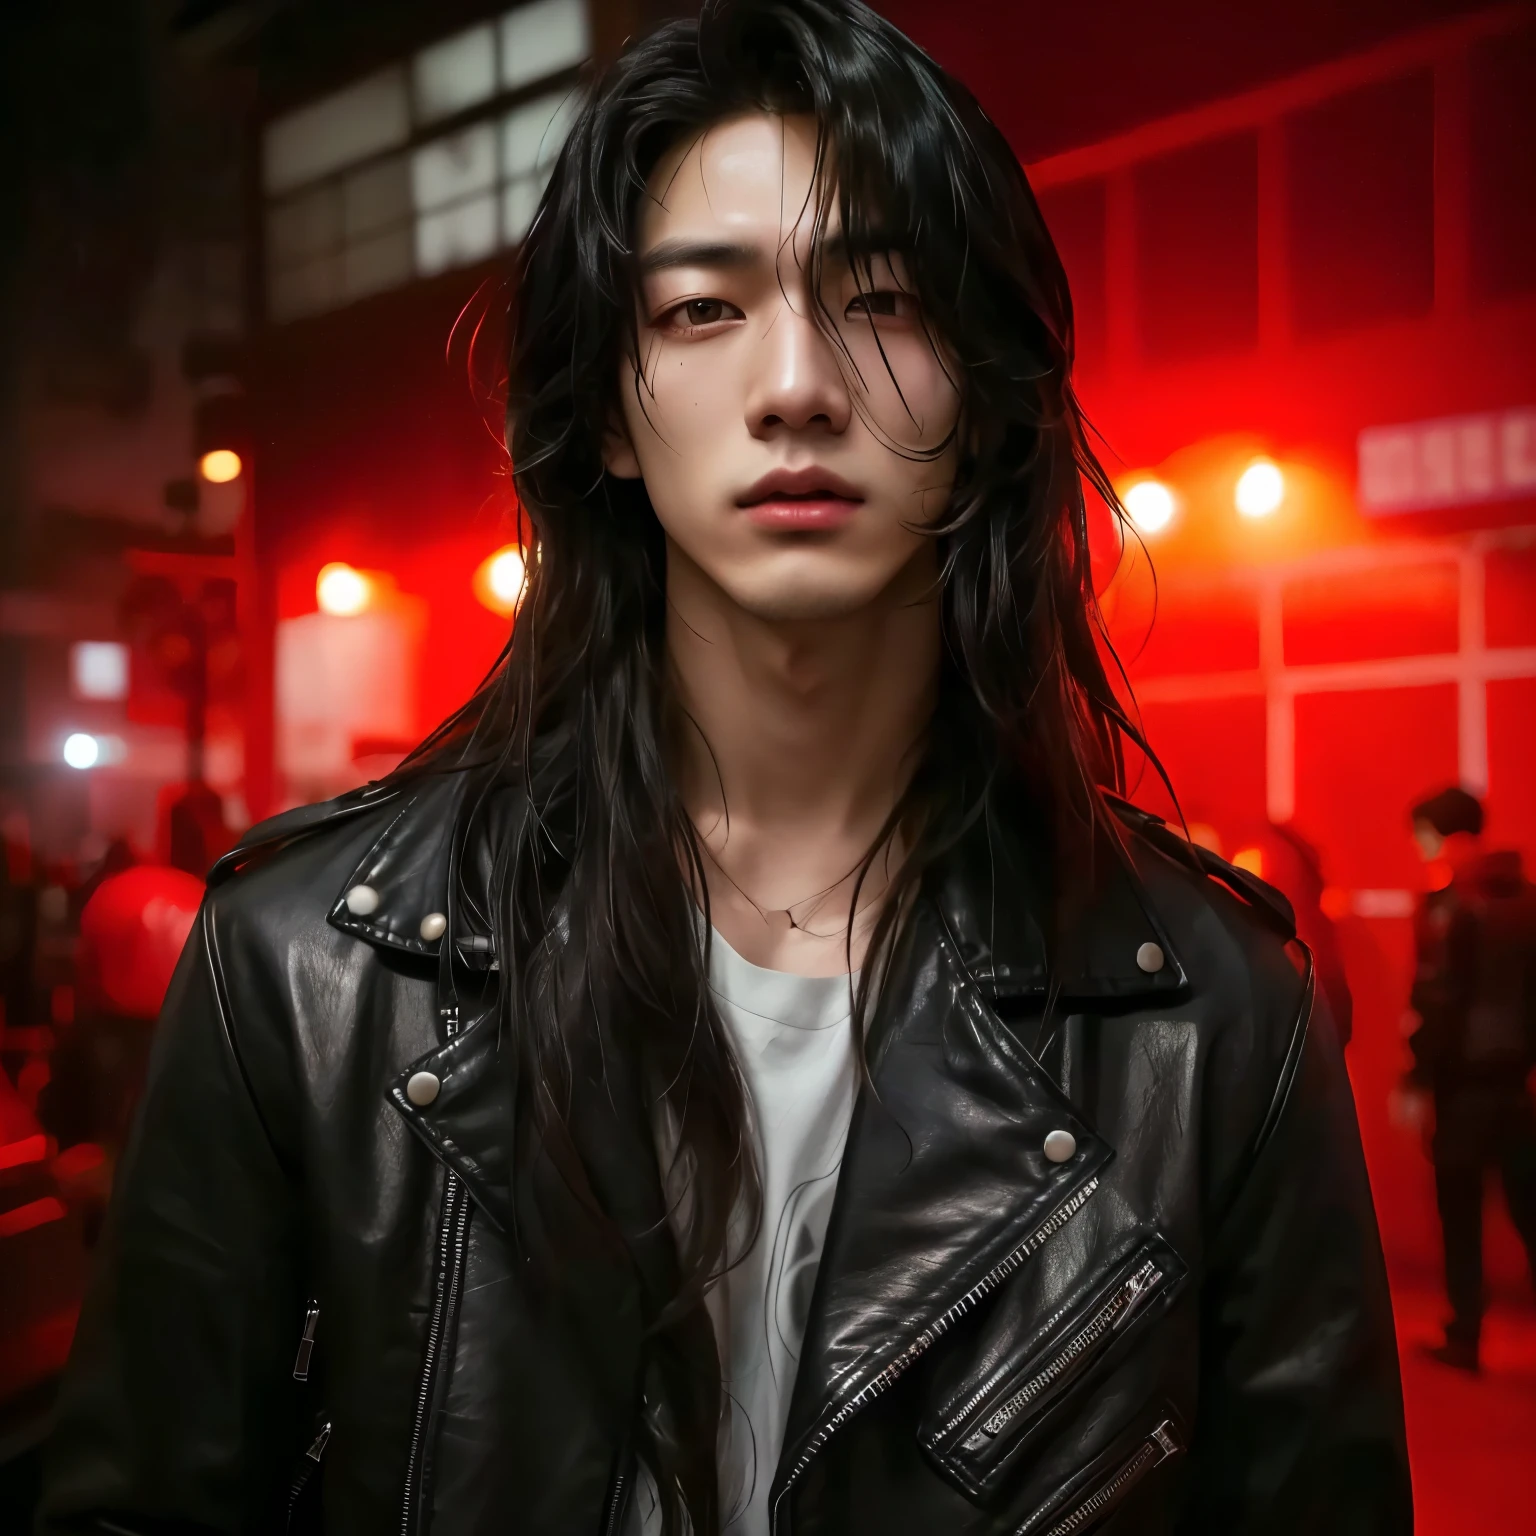 asian image of a man in a leather jacket standing in a dark room, male ulzzang, inspired by Jeon Jungkook, jungkook, luts, inspired by jeon jungkook, inspired by Jungkook Jeon, Jungkook, inspired by jungkook, with long hair, jungkook, south korean male, young with long hair angry face staring with red light ambient